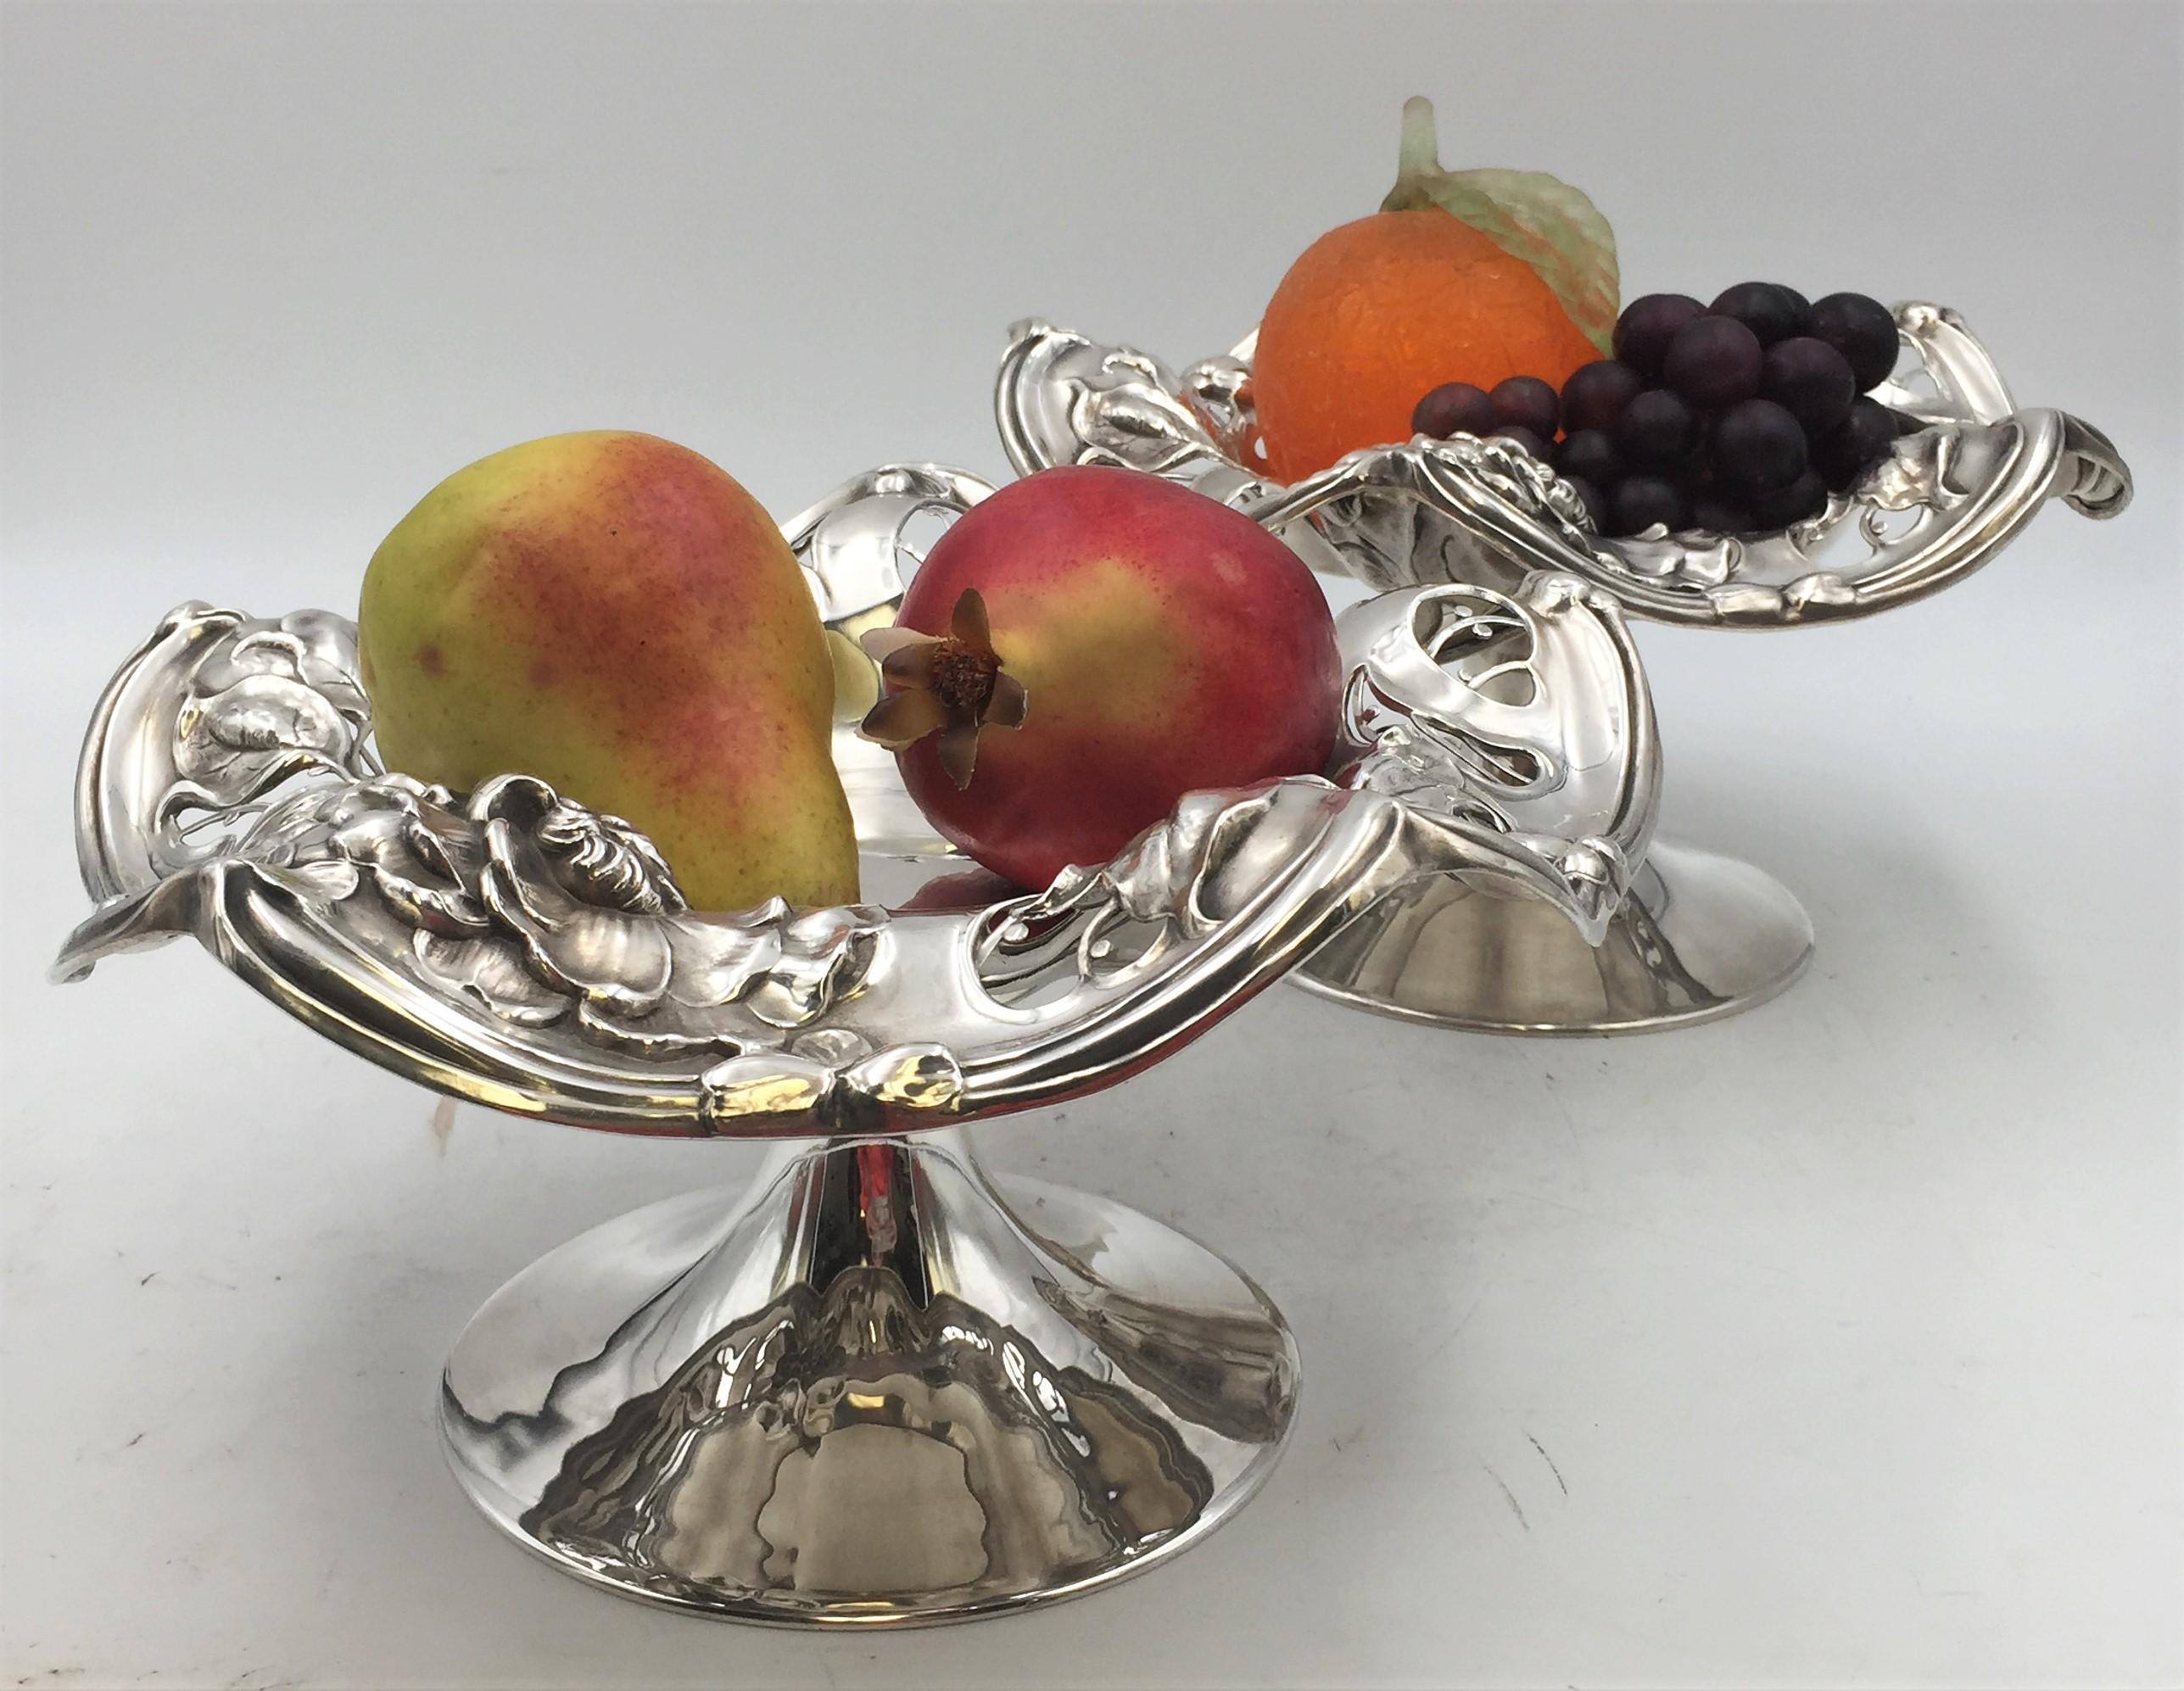 Early 20th century pair of Simpson, Hall, Miller & Co. sterling silver compotes / footed centerpiece bowls in exquisite Art Nouveau style with pierced work and raised floral motifs, in a riveting, twirling shape. They measure 10'' in diameter by 5